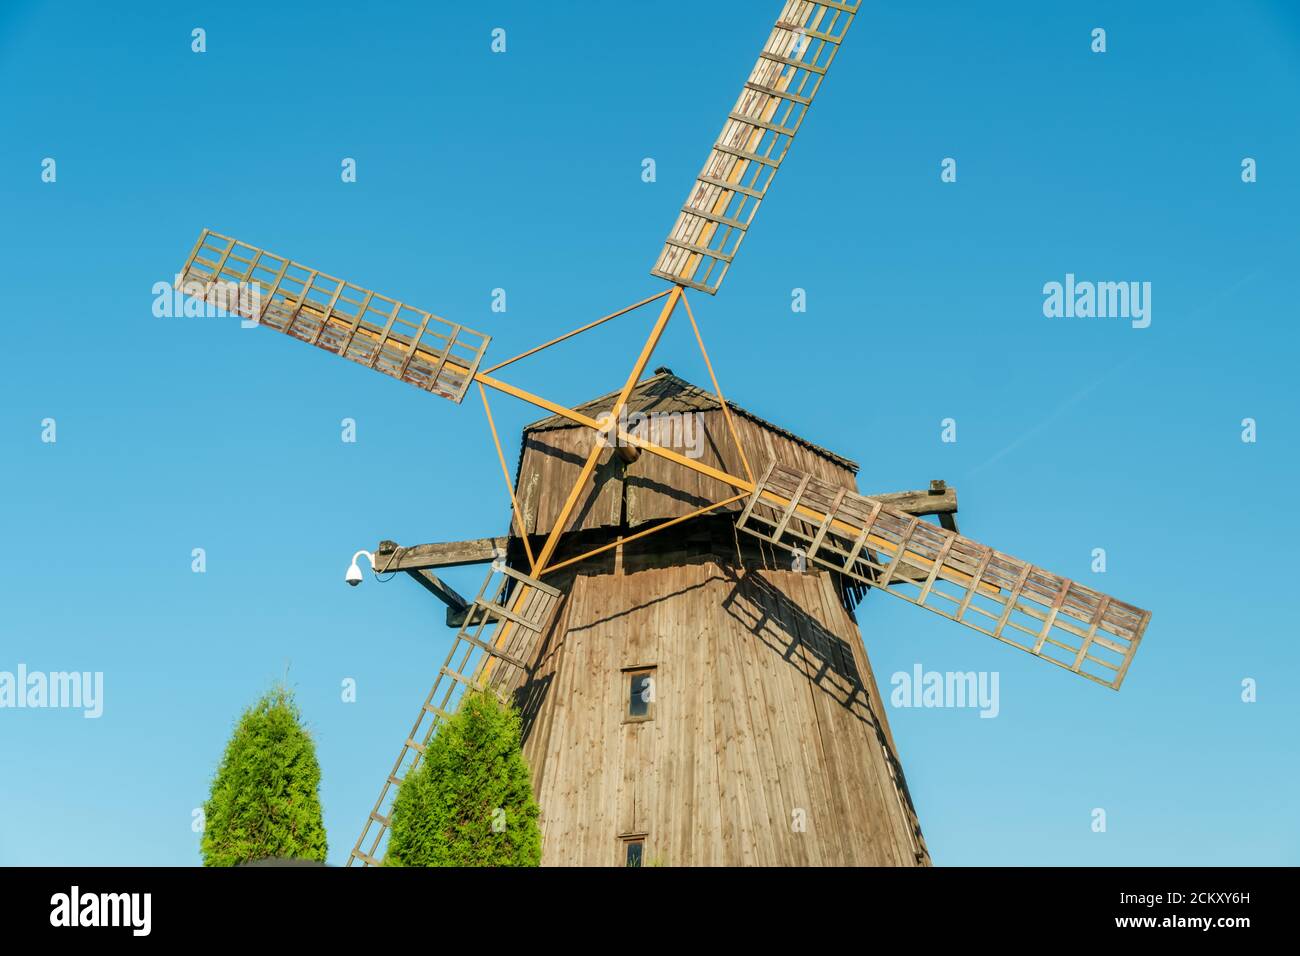 Windmill. Big wooden mill on blue sky background on Sunny summer day. Waste mill green arborvitae Stock Photo